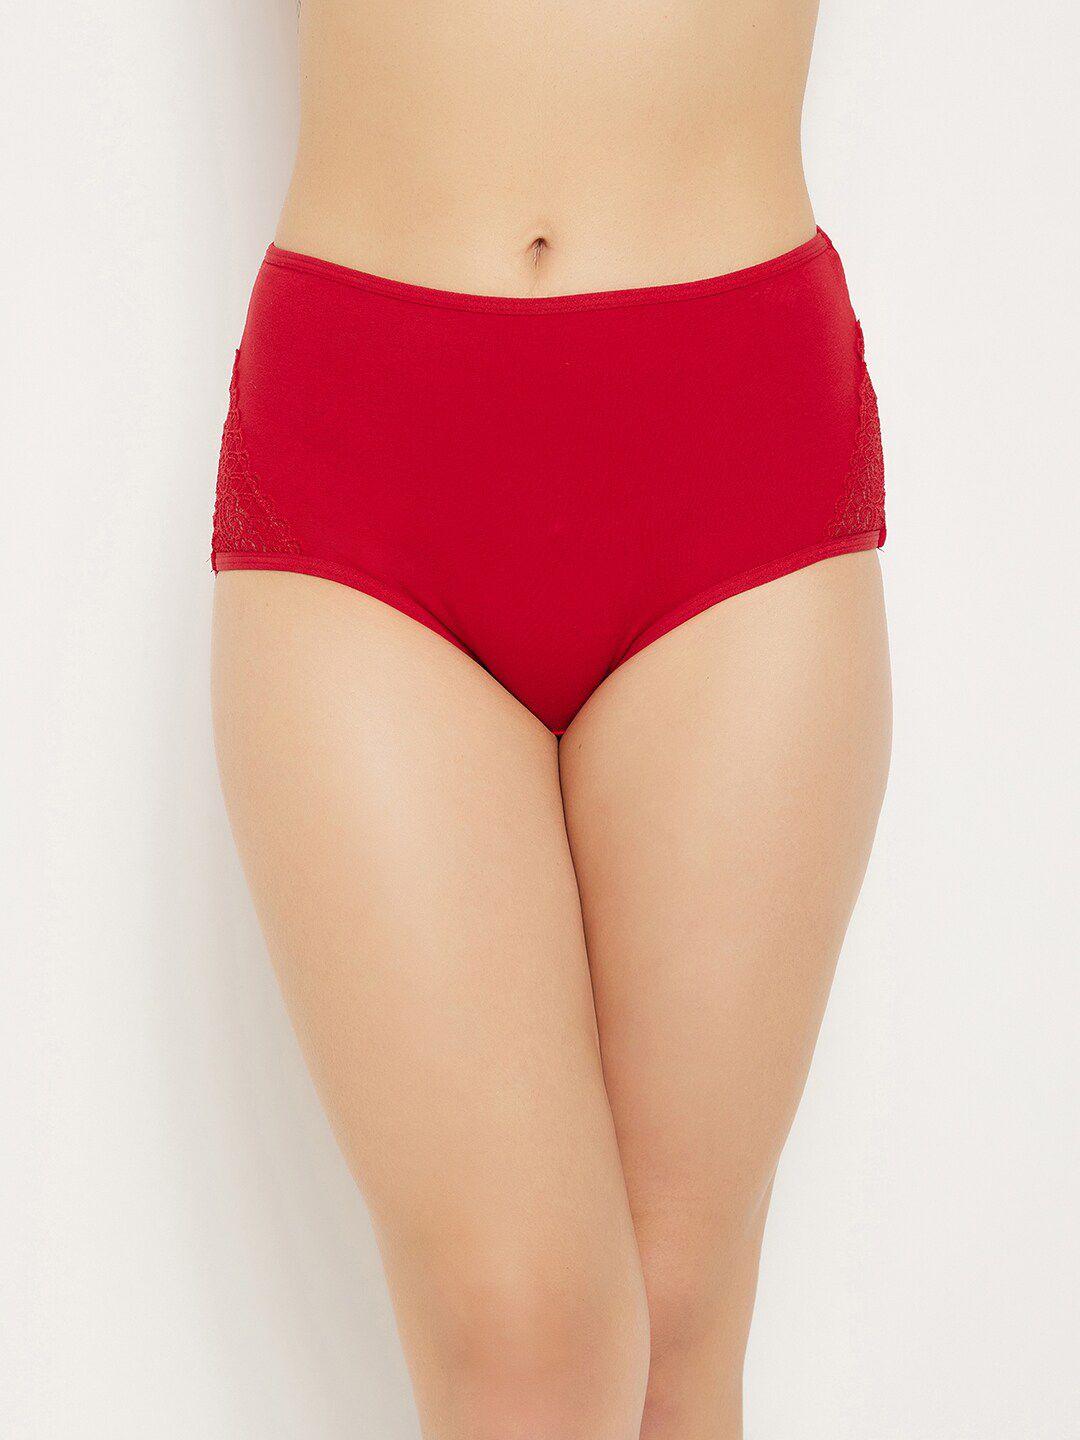 clovia-women-red-solid-cotton-lace-hipster-briefs